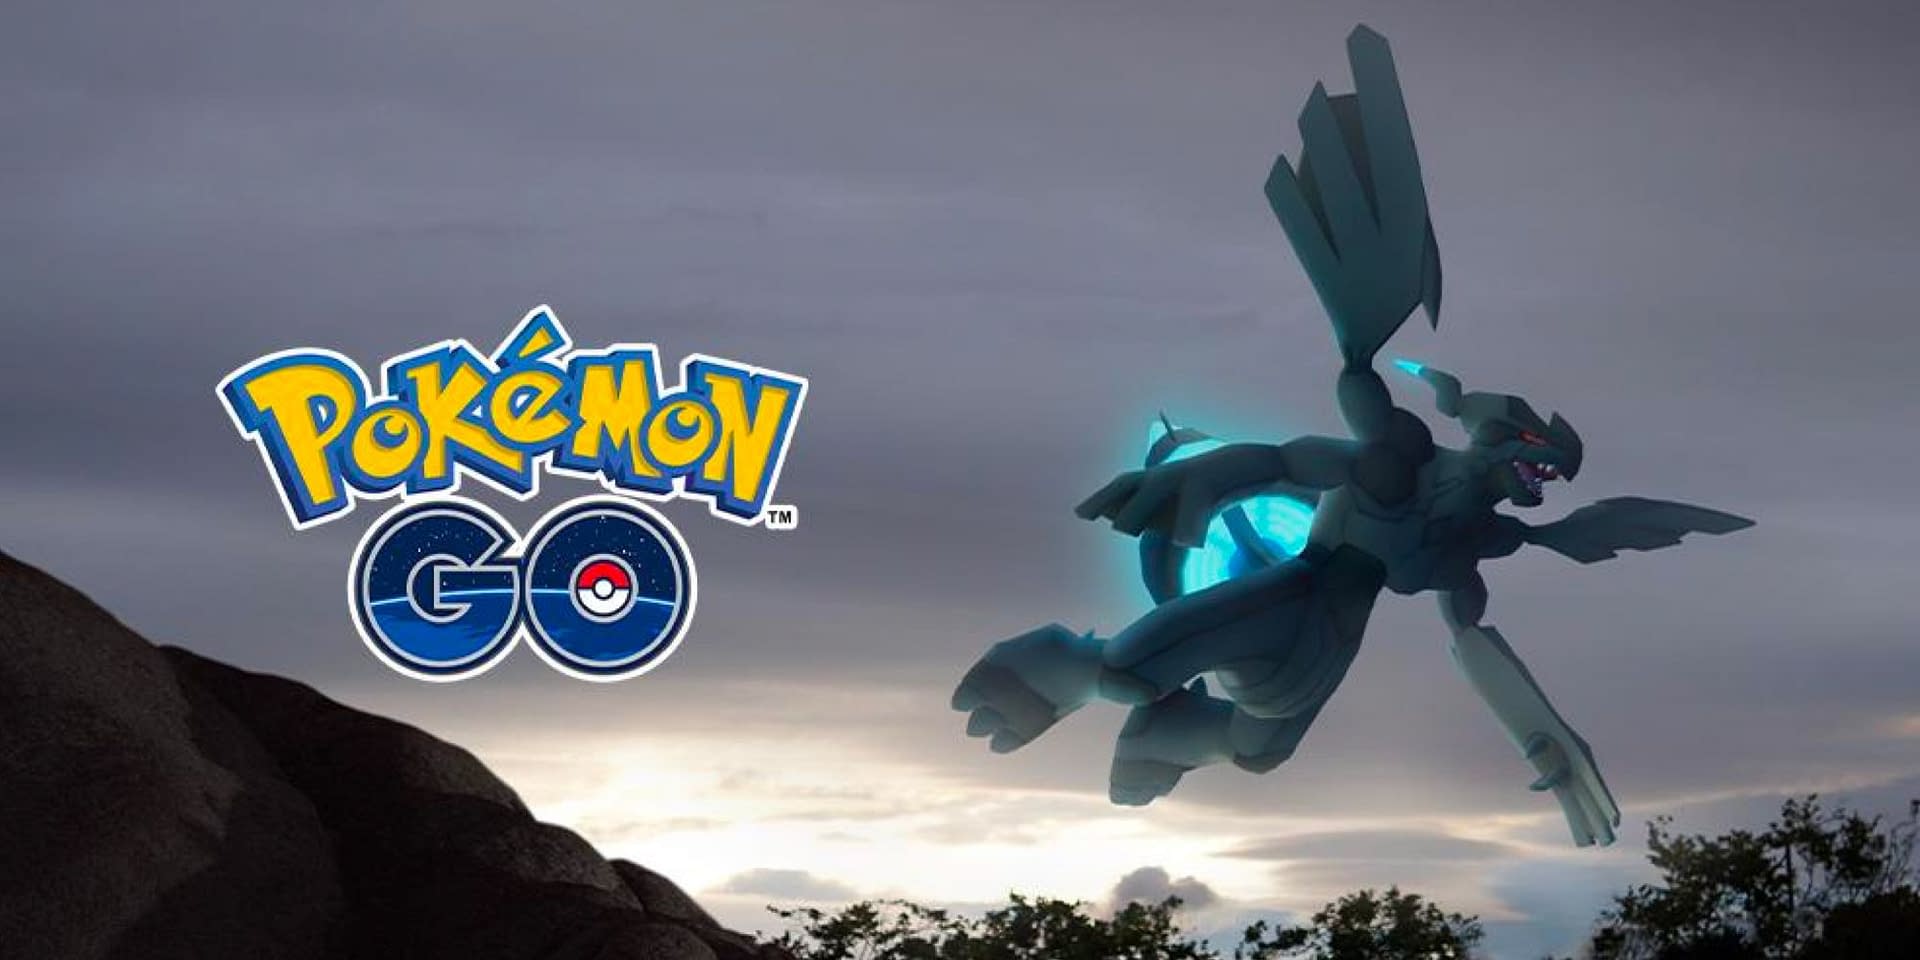 How To Get Guaranteed Shiny Zekrom in Pokemon Go